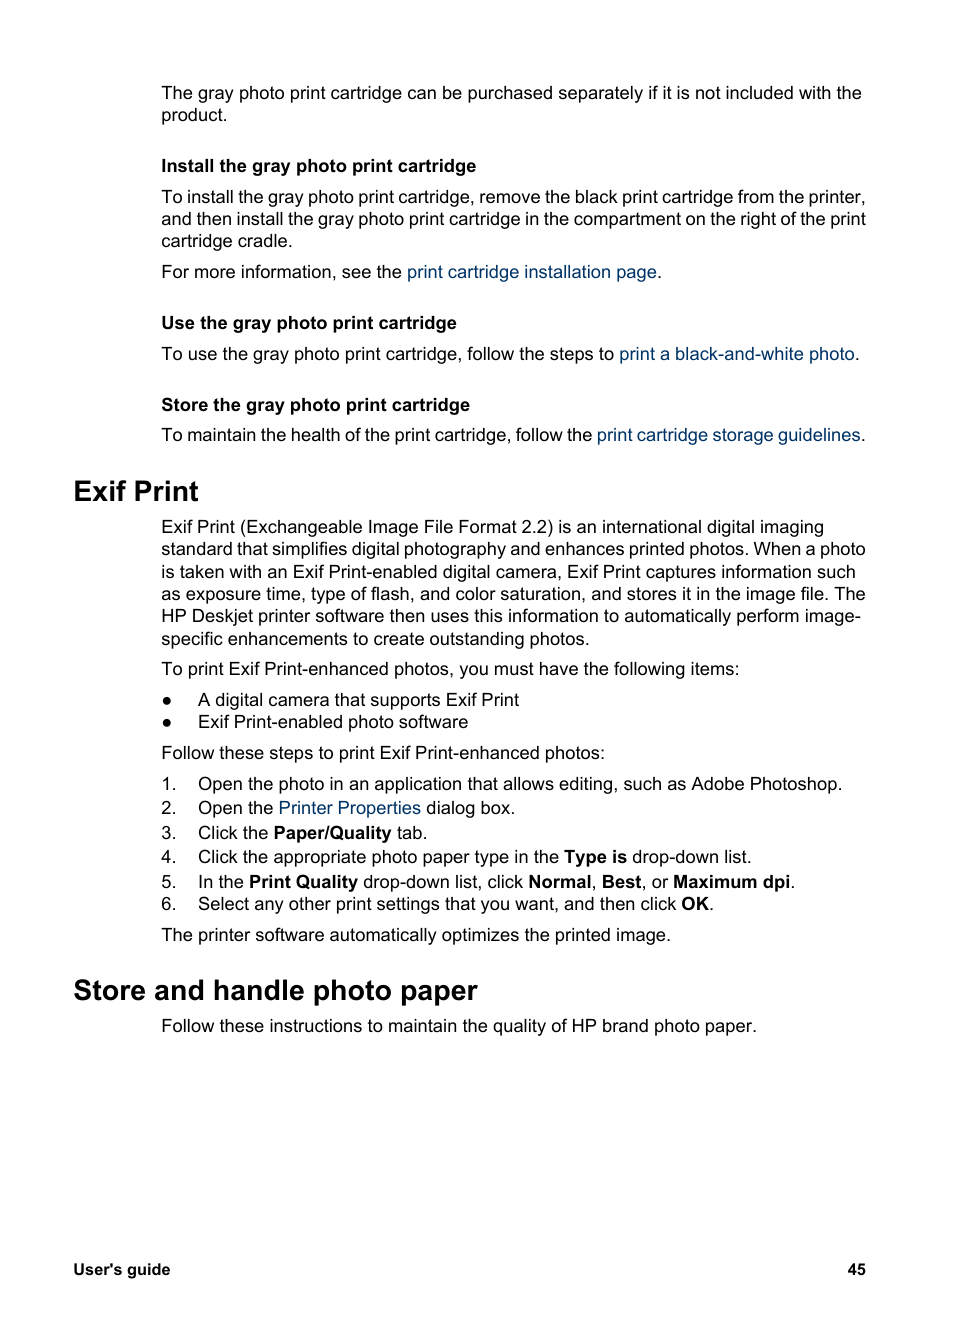 Exif print, Store and handle photo paper, Exif print store and handle photo paper | Print an, Exif print-formatted, Photo paper storage and handling, Guidelines, Photo paper storage instructions | HP Deskjet 6940 User Manual | Page 47 / 150